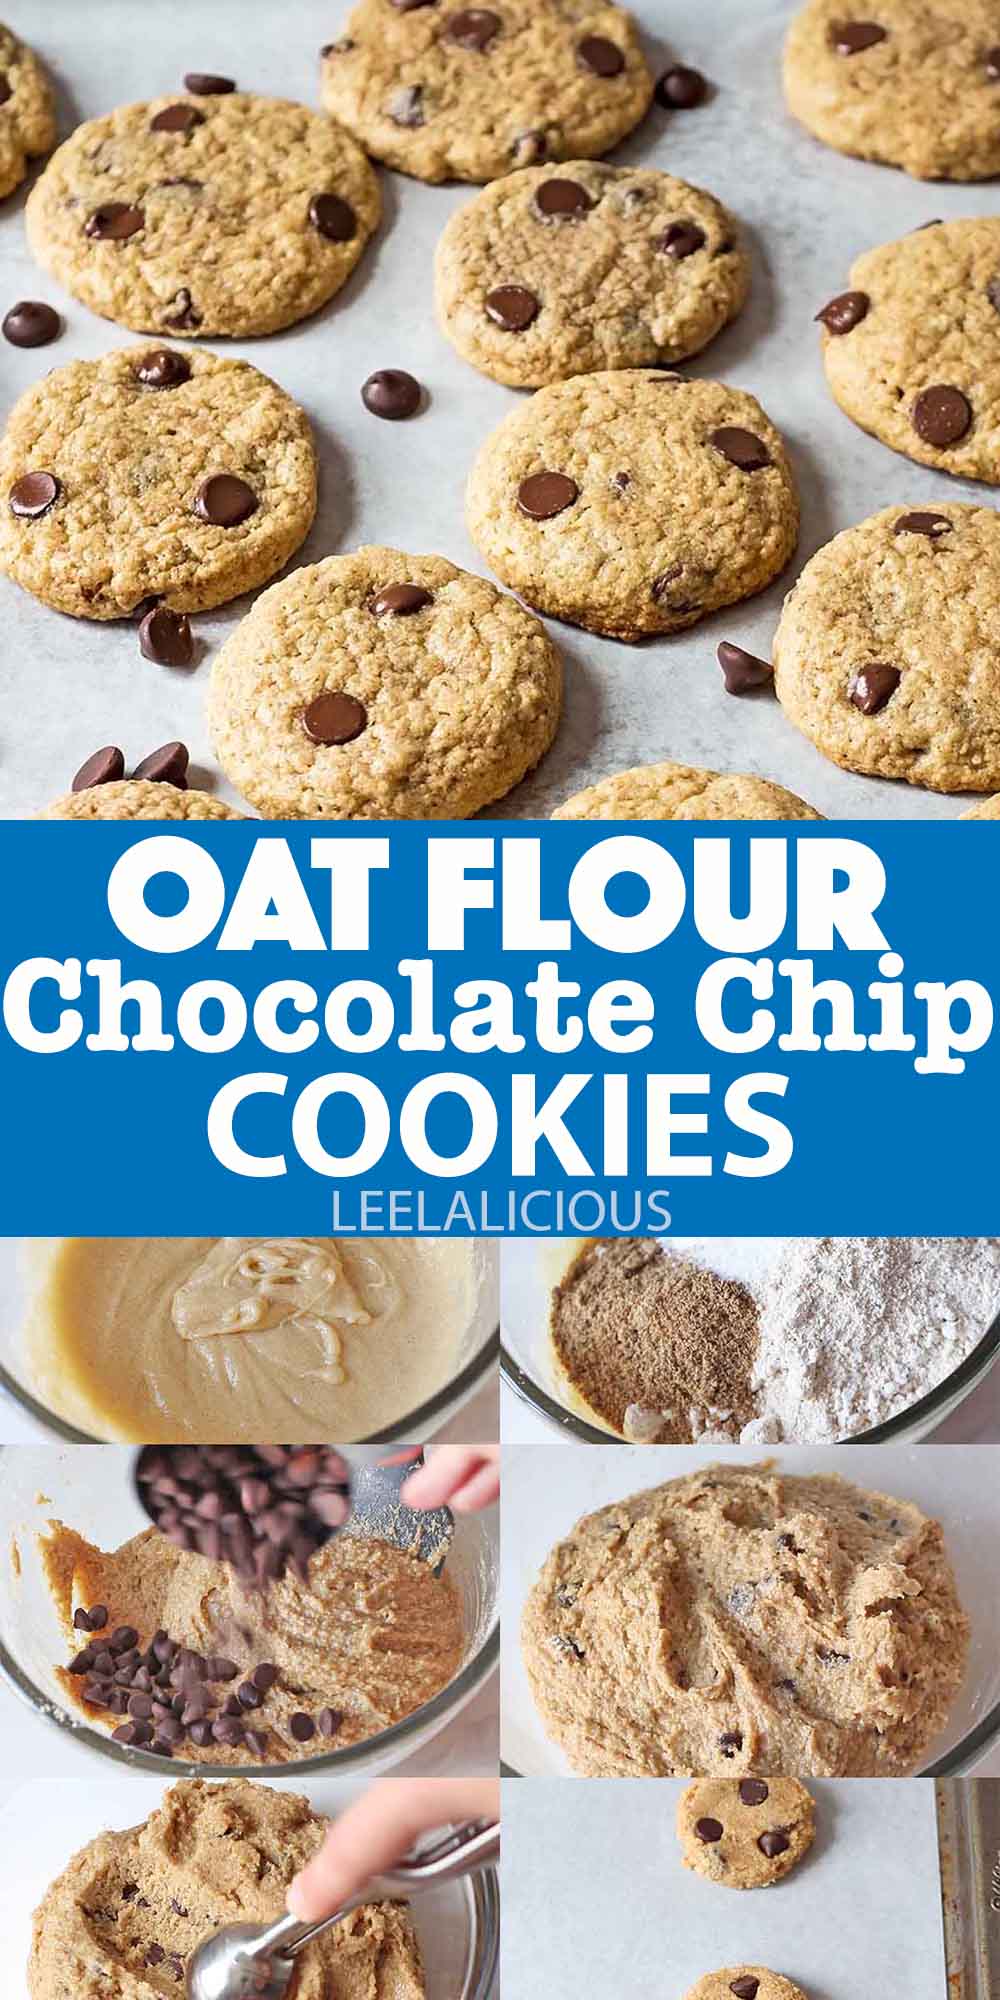 Oat Flour Chocolate Chip Cookies Recipe on baking sheet and process pictures